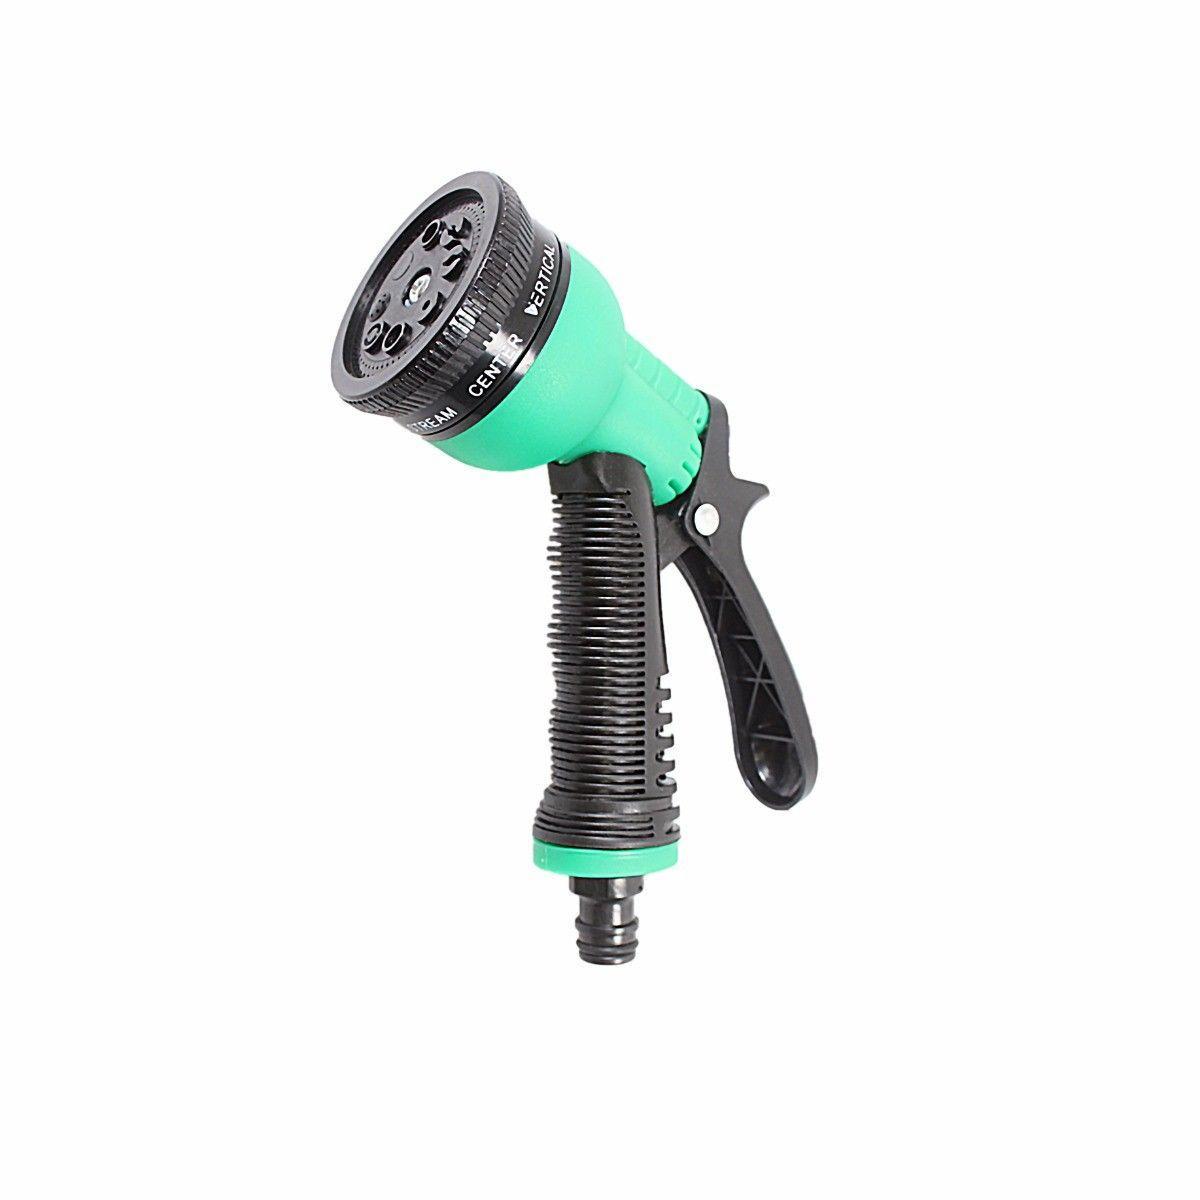 Hose Pipe Fittings Nozzle Connector Water Spray Gun Set Outdoor Garden Hosepipe 3474 (Parcel Rate)